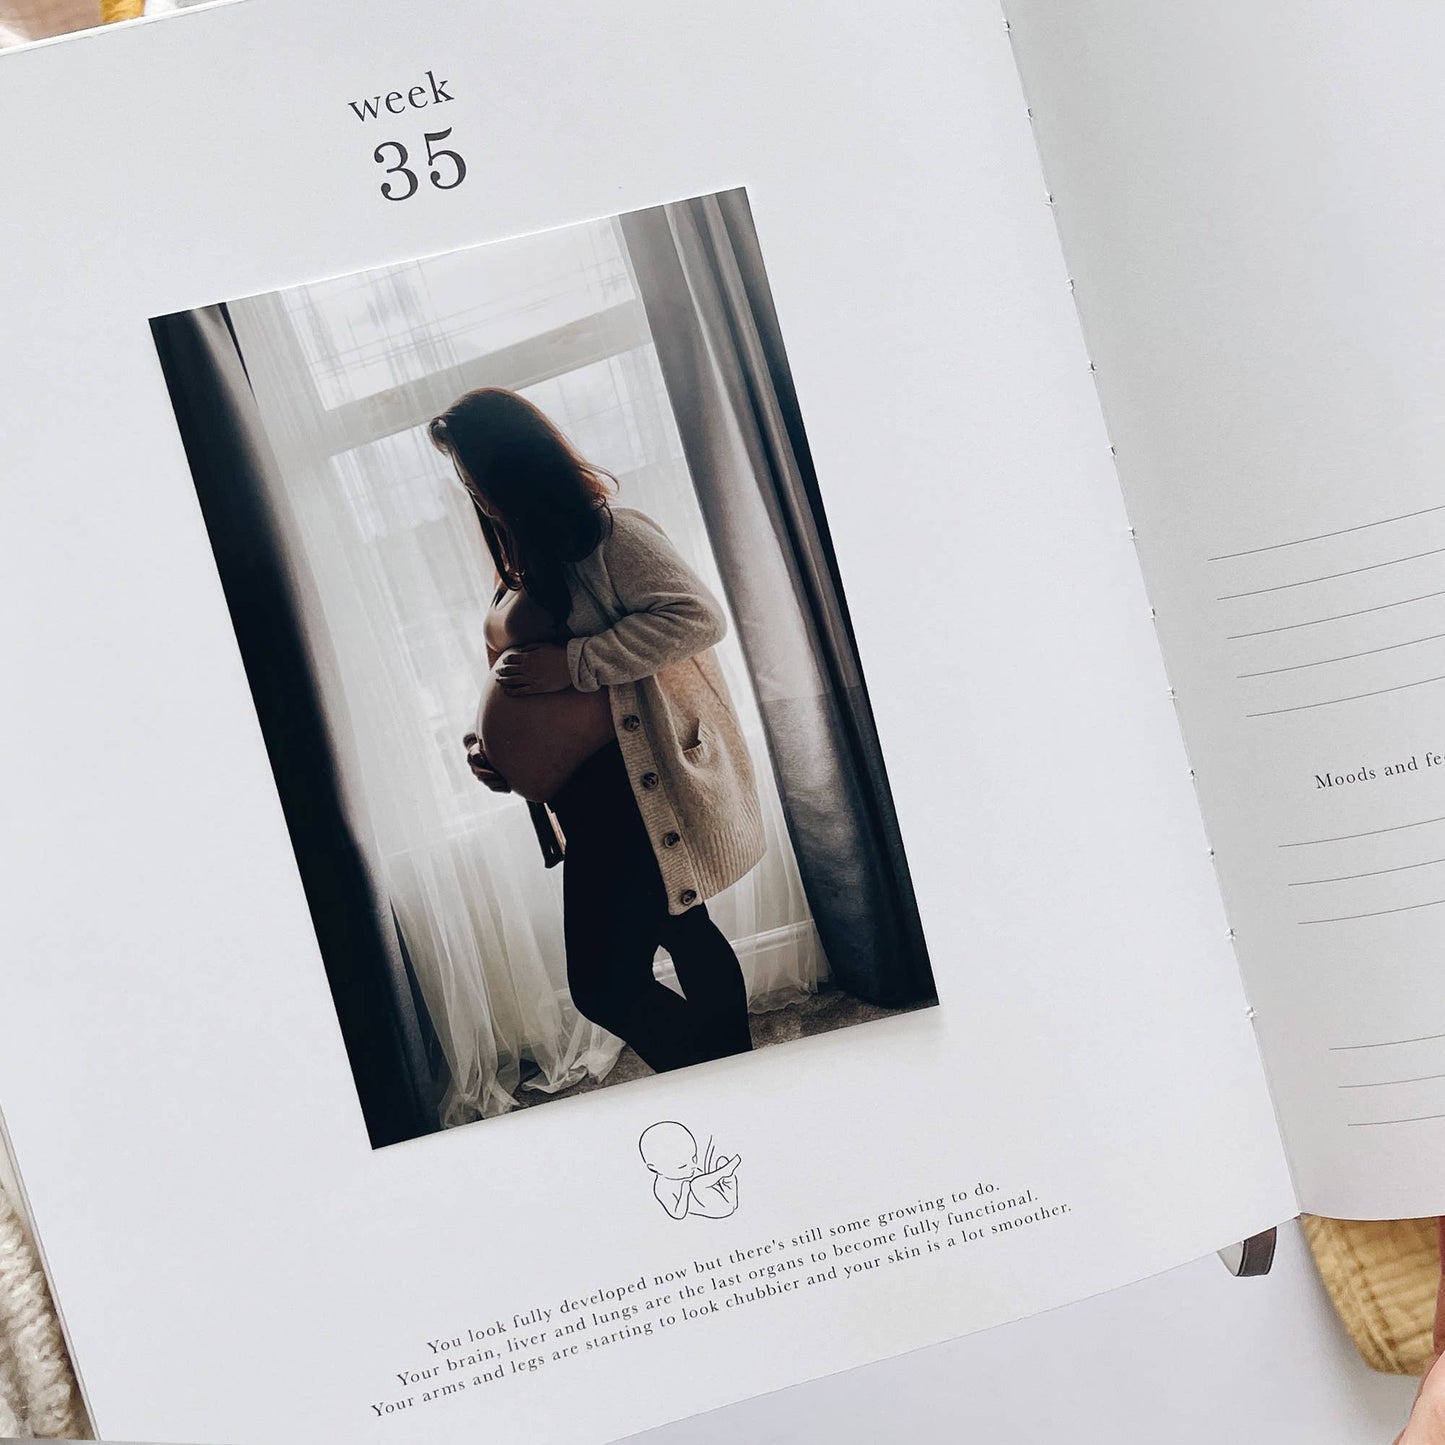 Pregnancy Journal (Pearl) By Blush & Gold